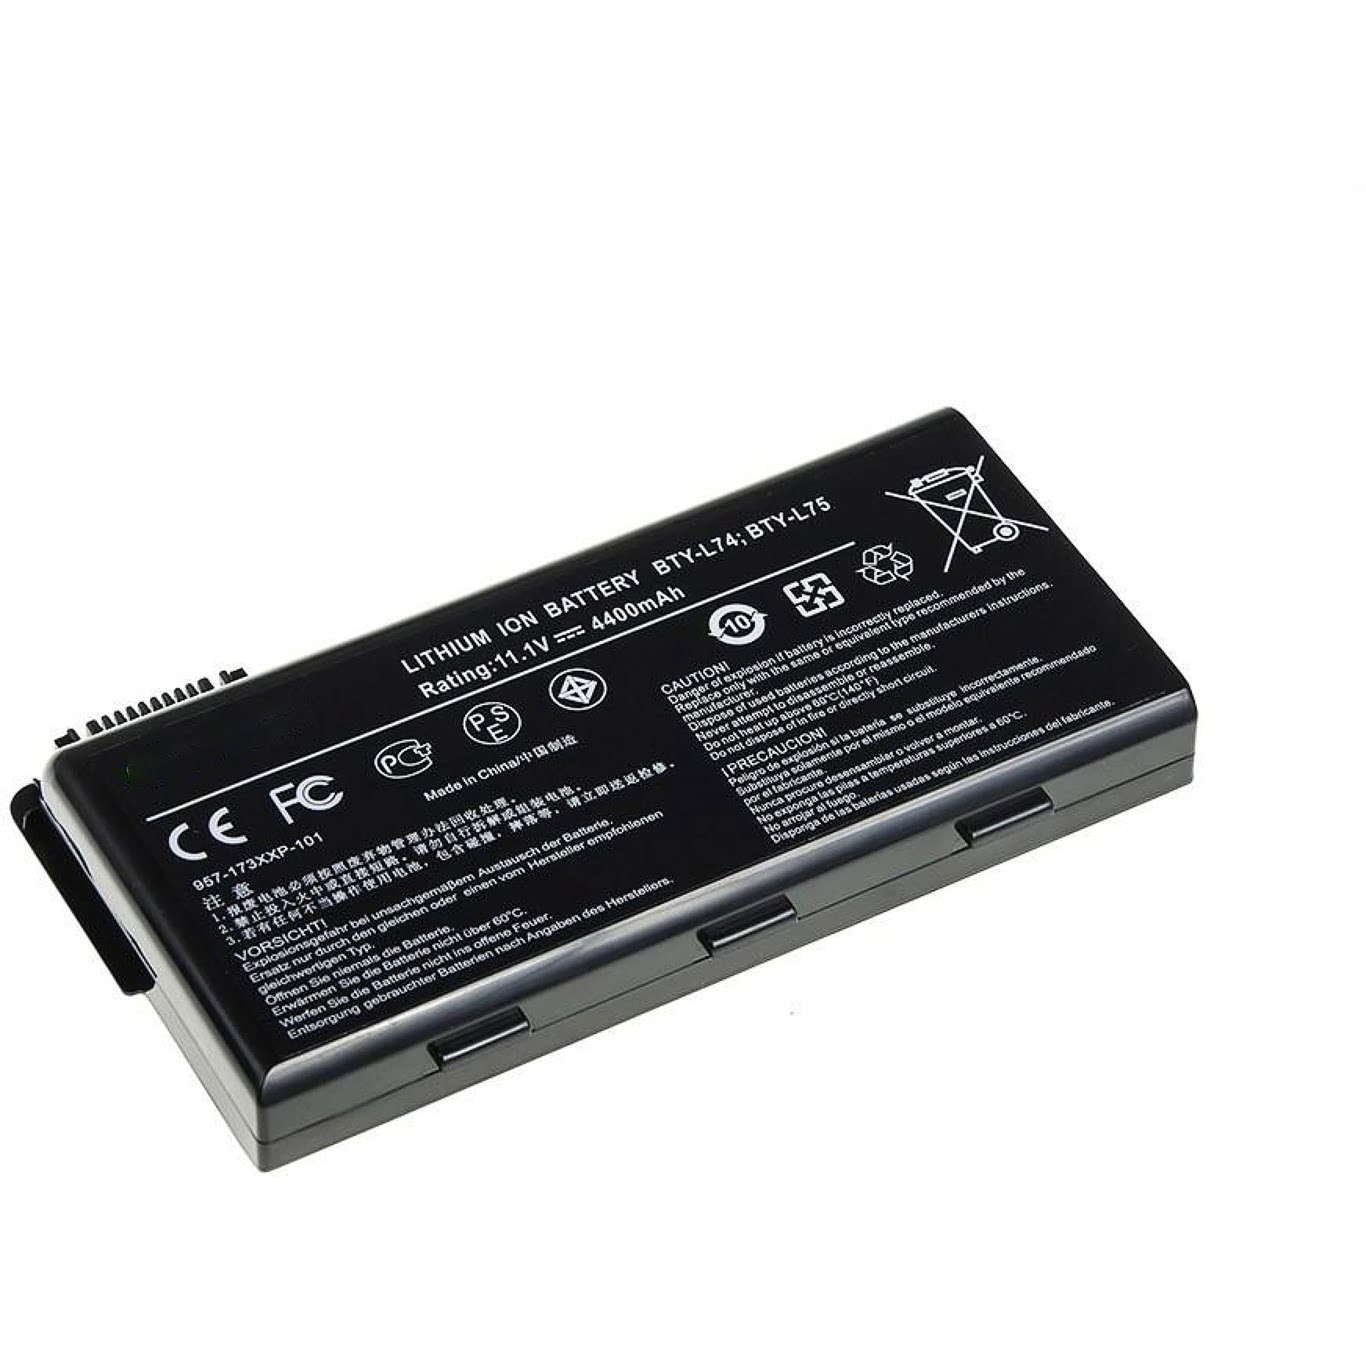 957-173XXP-101, 957-173XXP-102 replacement Laptop Battery for MSI A5000, A6000, 11.1V, 4400mAh, 6 cells